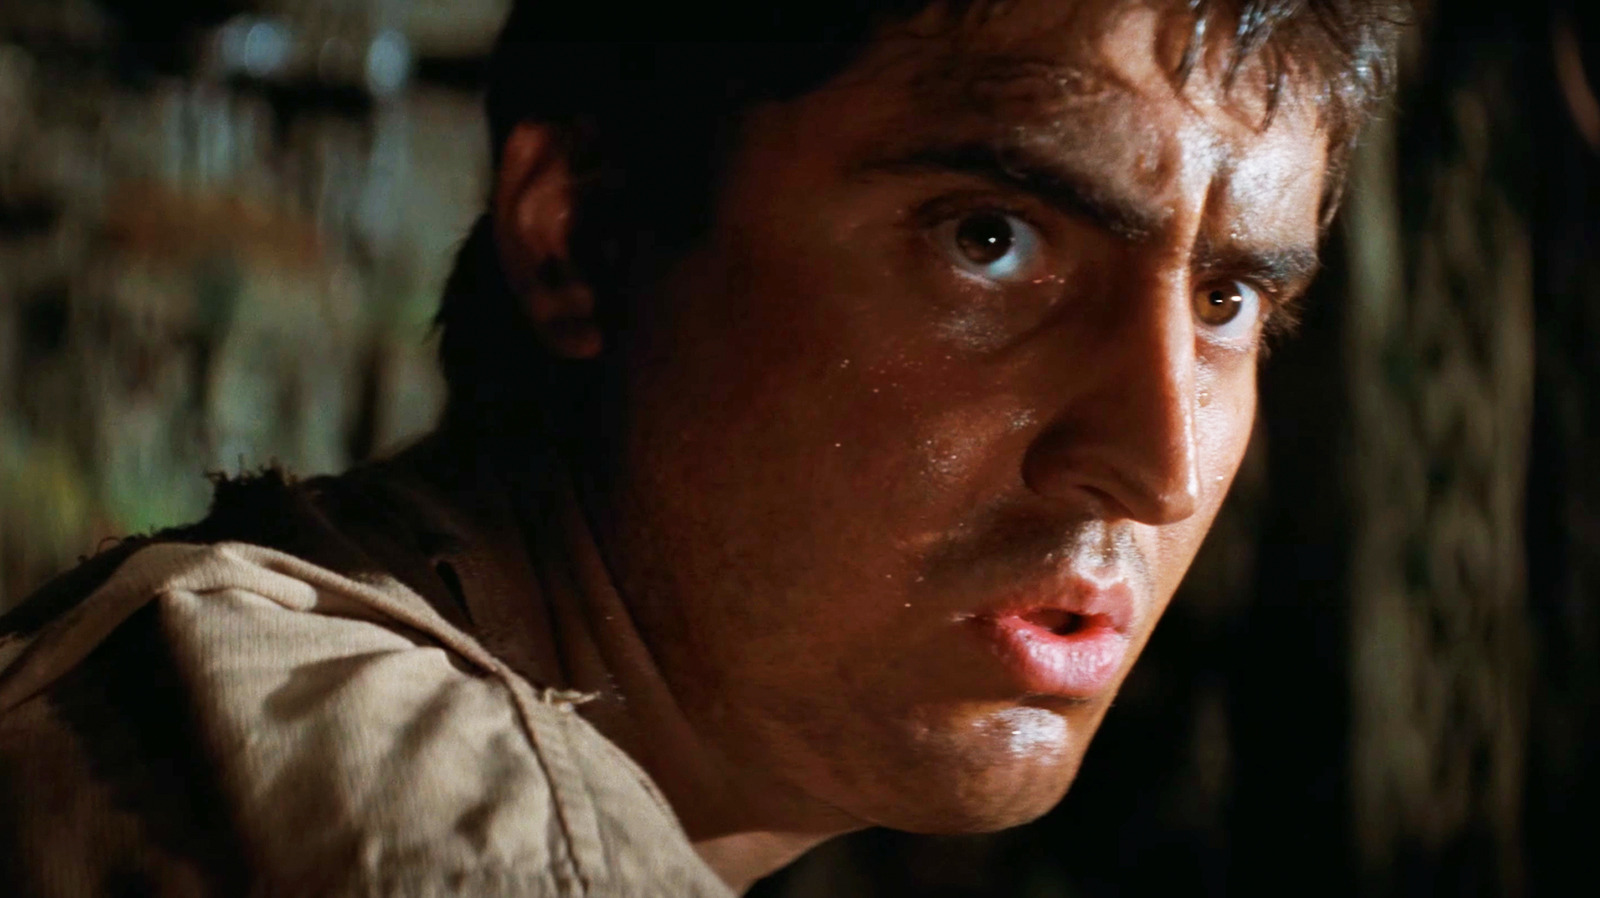 Alfred Molina Didn't Have To Act Much In Raiders Of The Lost Ark's Spider Scene With Indiana Jones